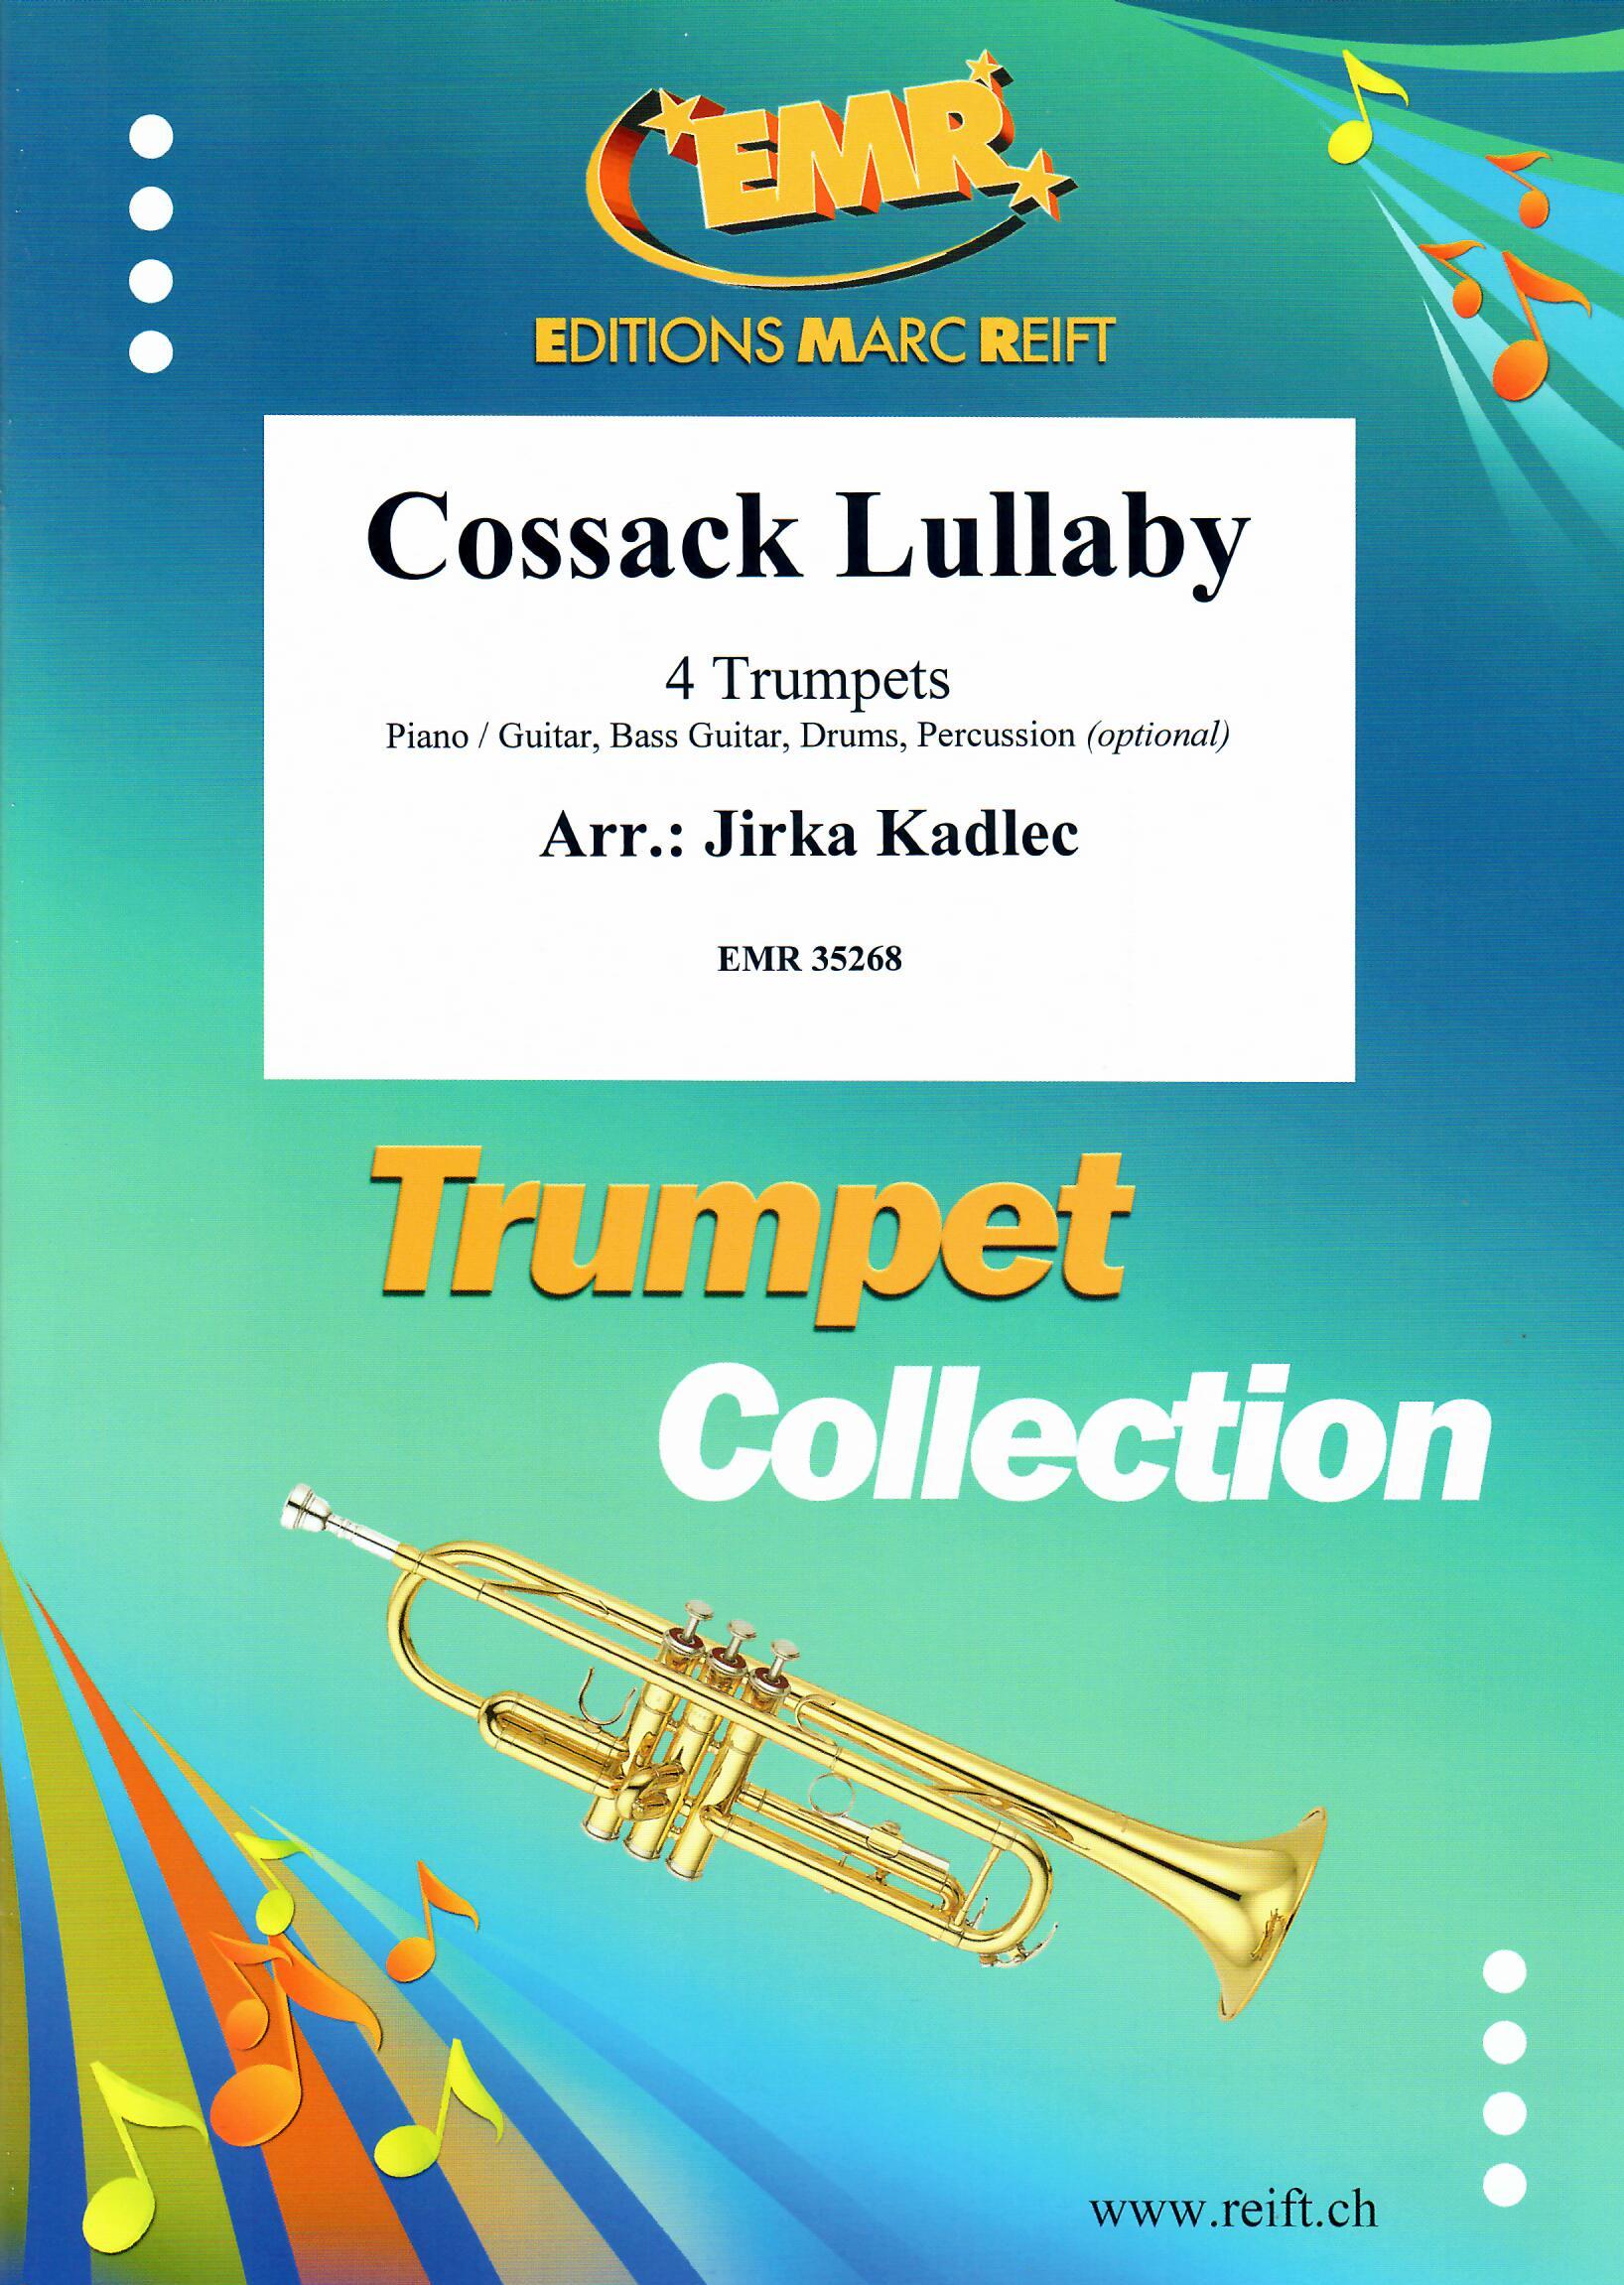 COSSACK LULLABY, SOLOS - B♭. Cornet/Trumpet with Piano